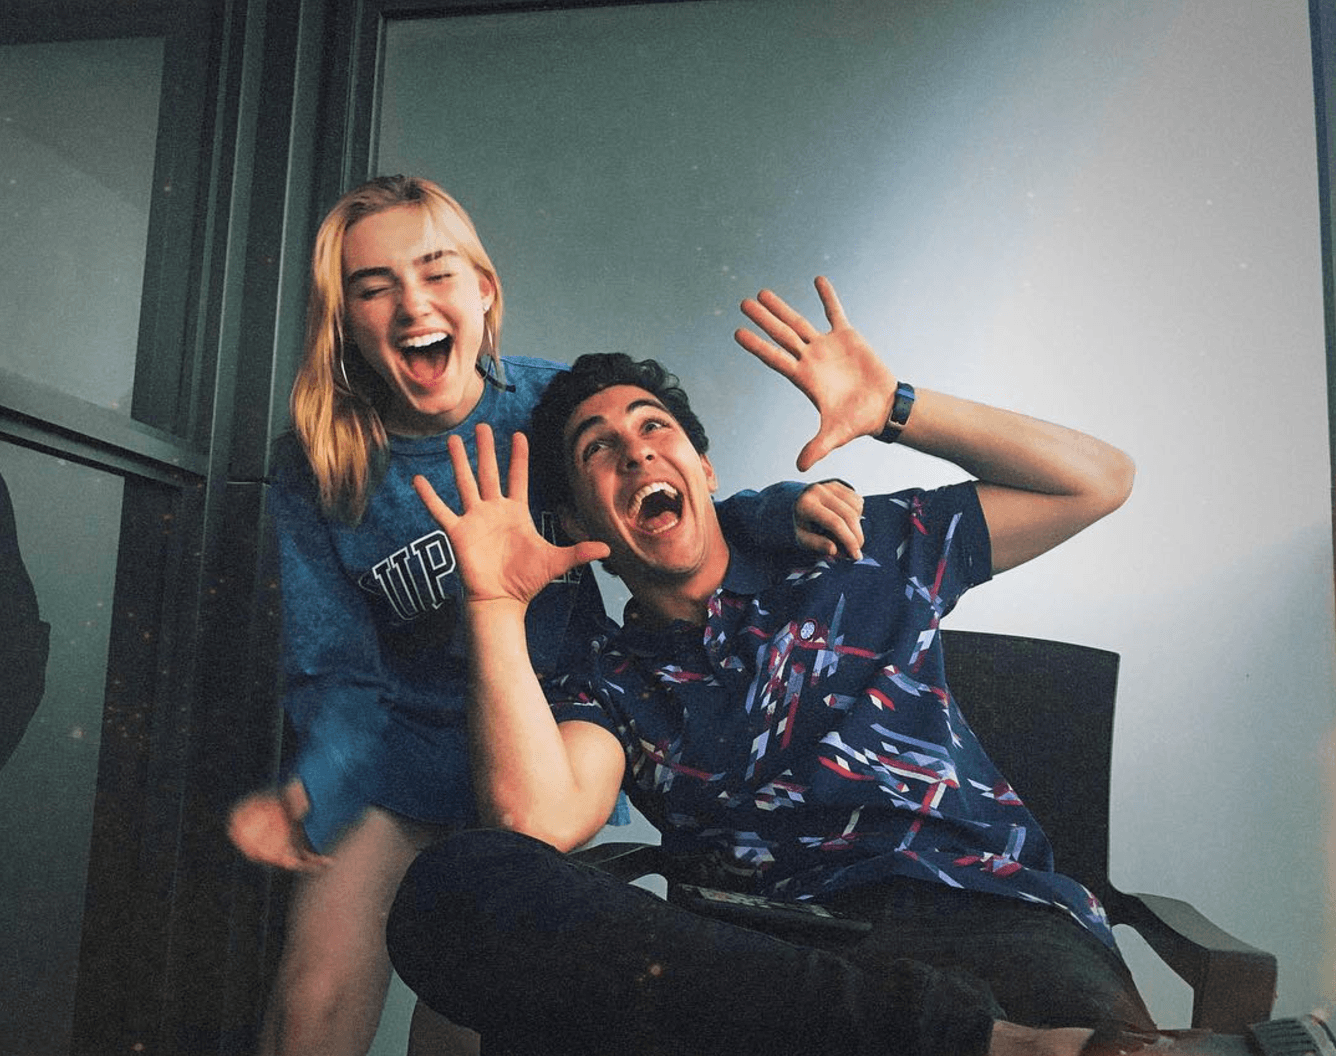 Disney's 'Zombies' Stars Milo Manheim and Meg Donnelly Share Behind